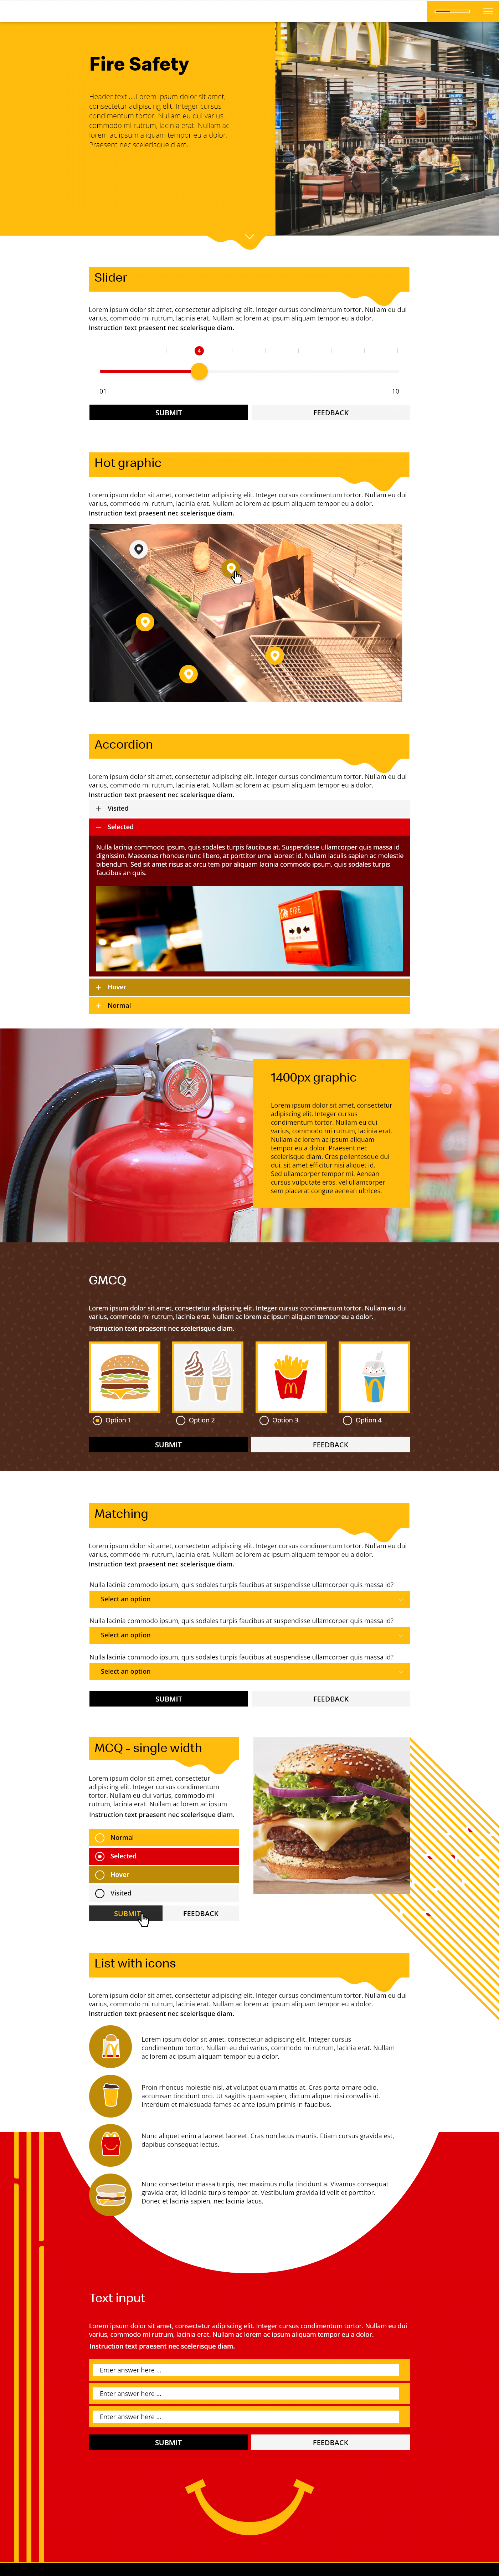 McDonalds elearning project page